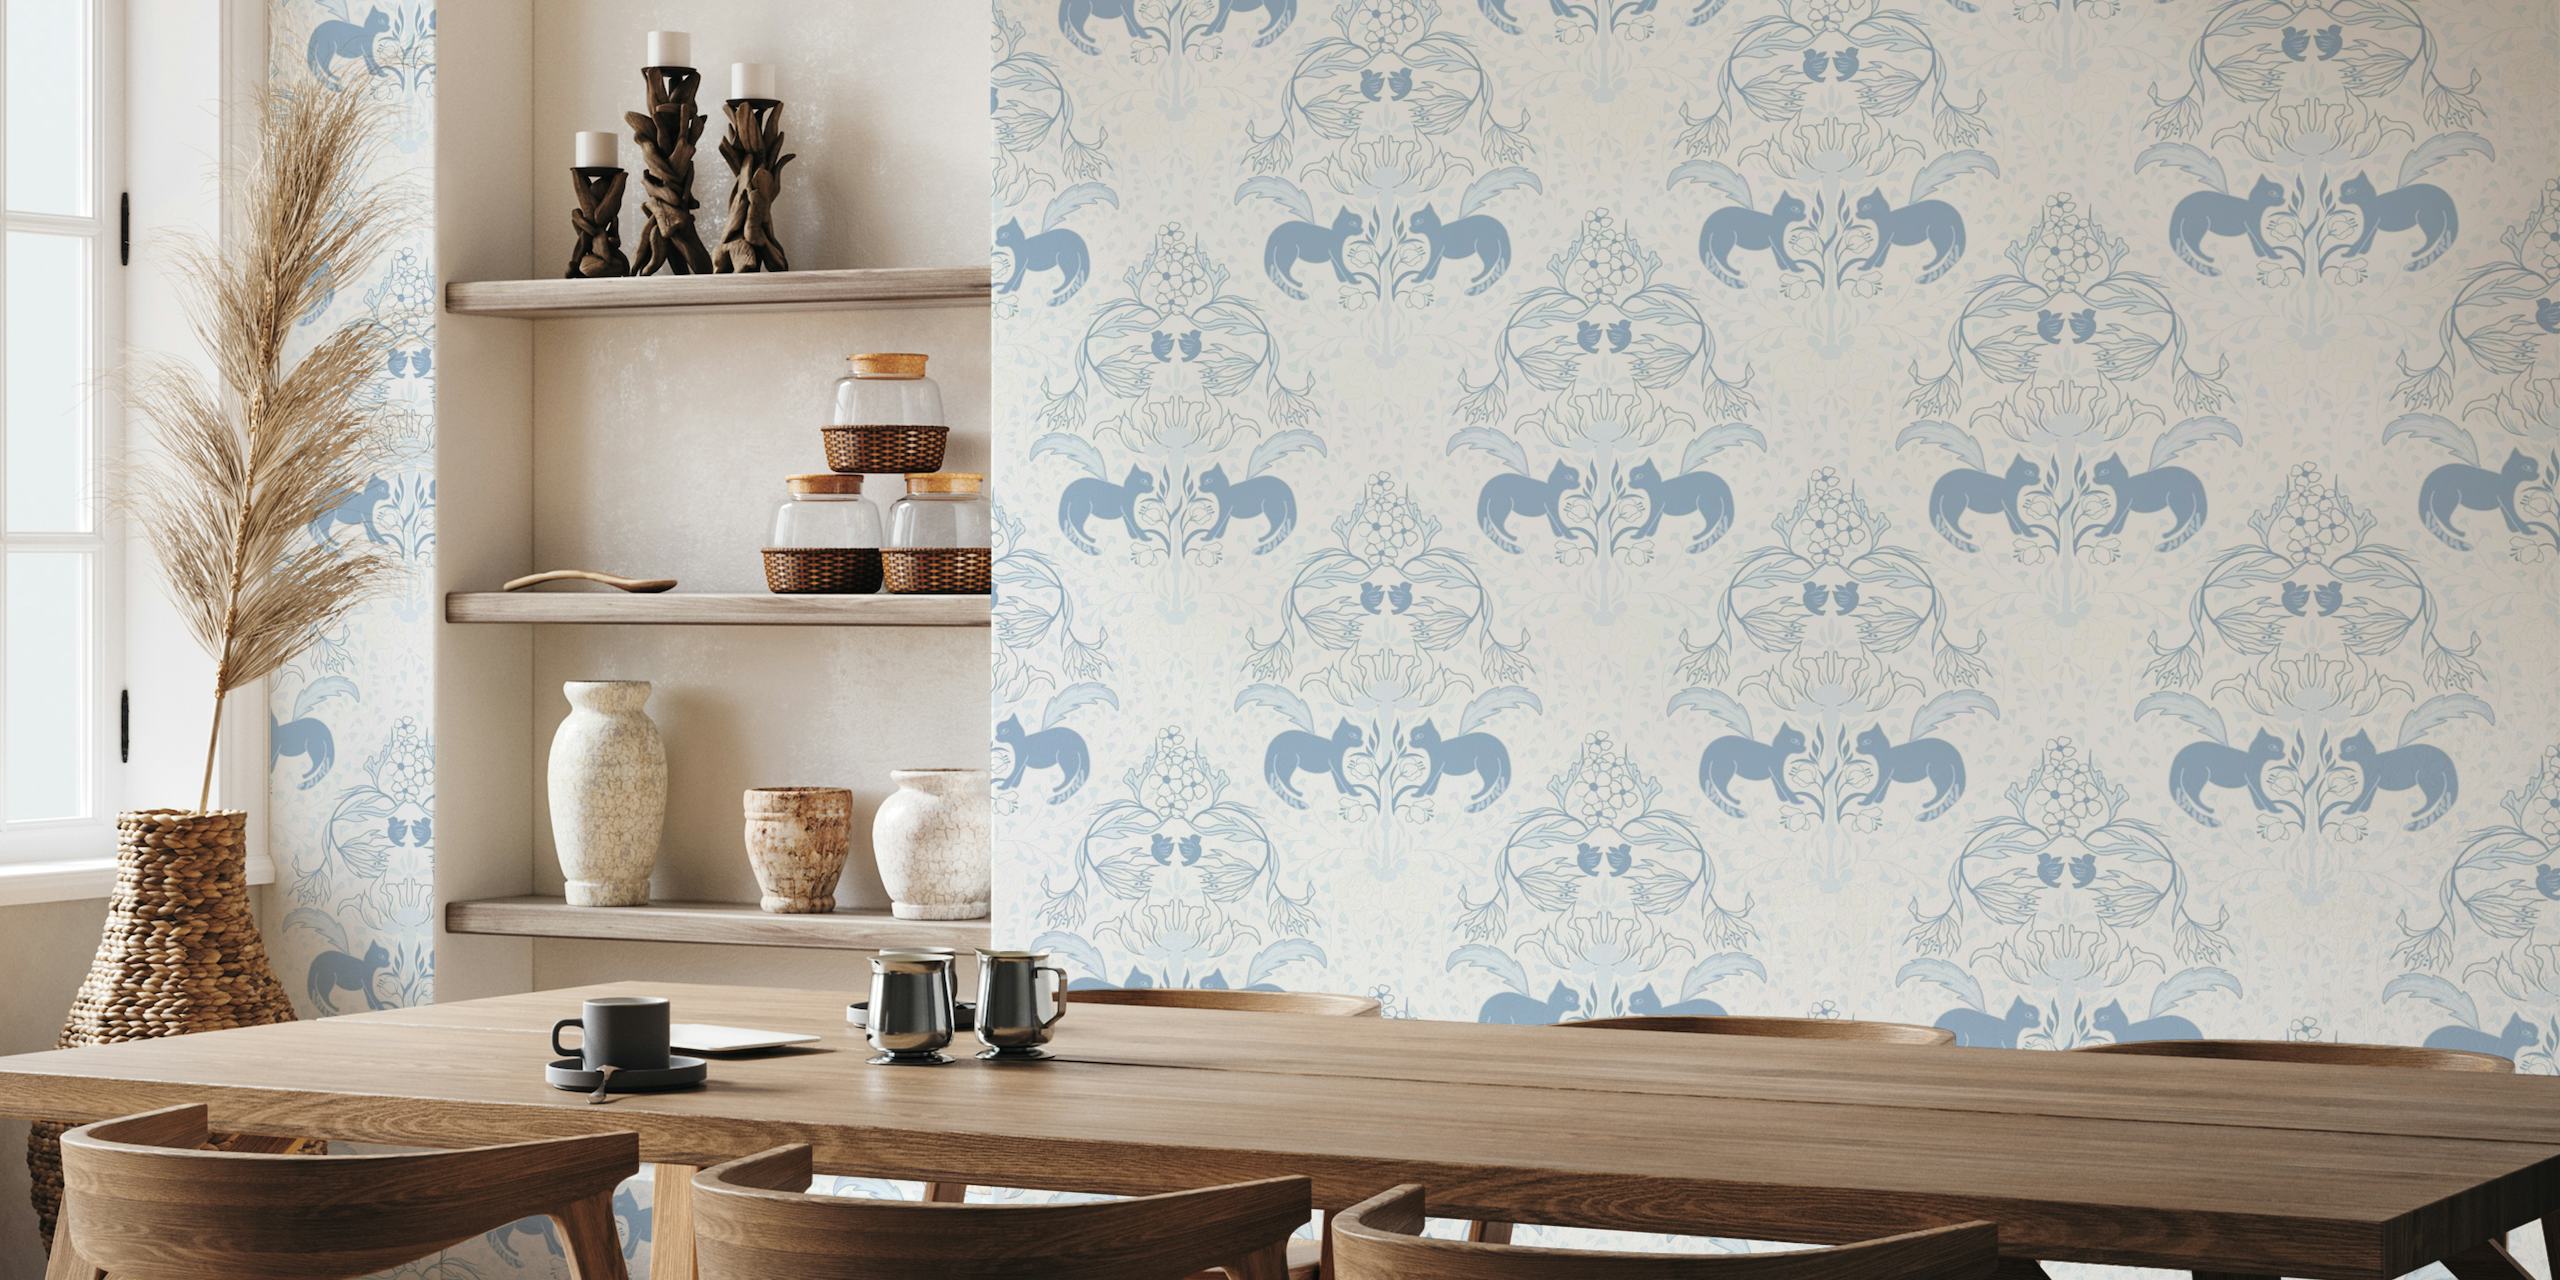 Blue and cream hunting cat patterned wall mural